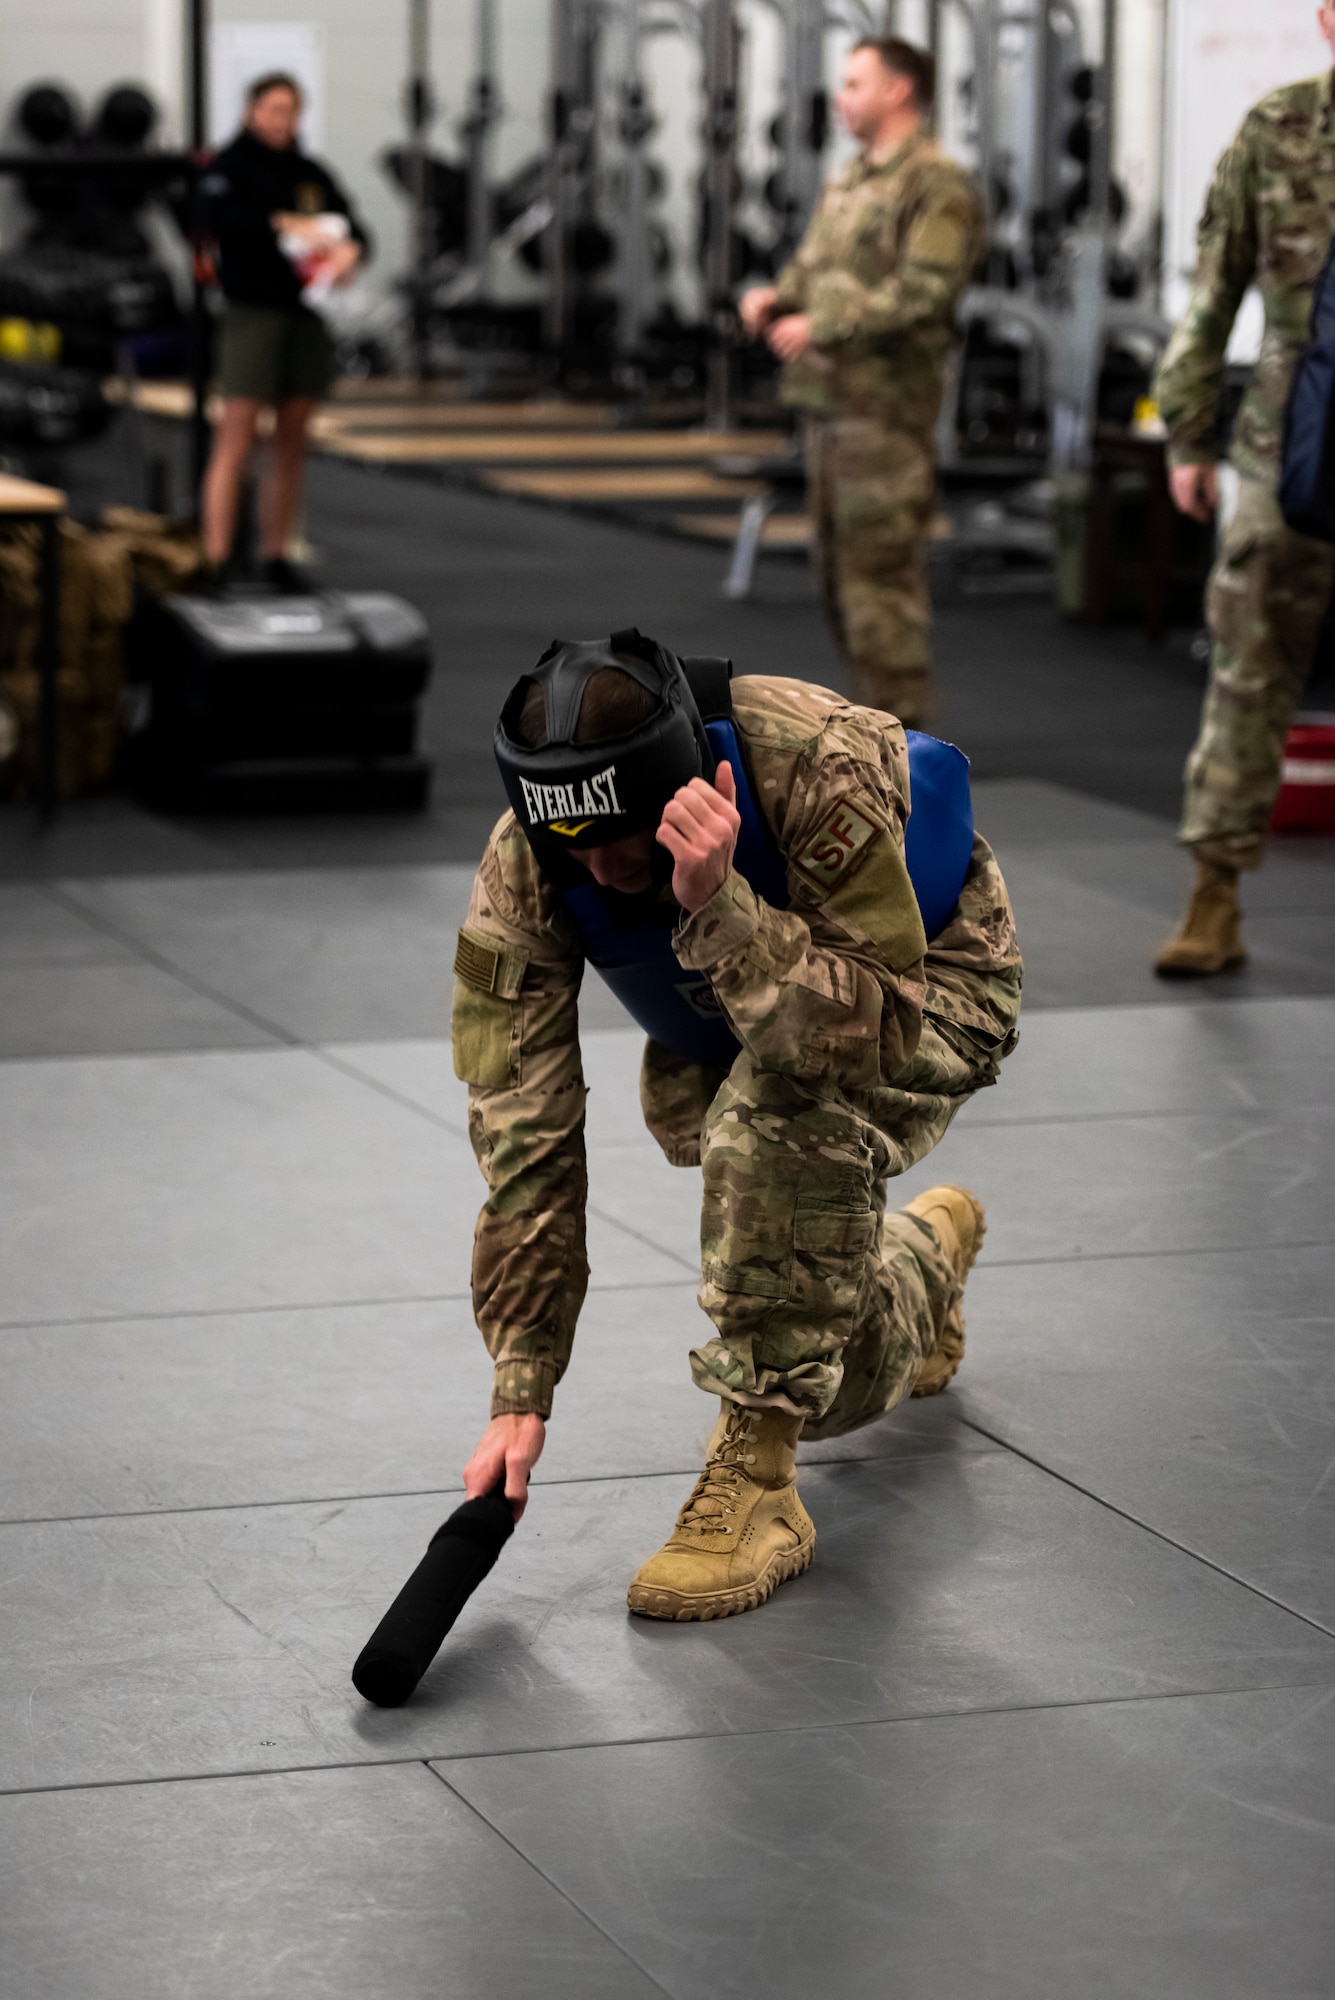 A U.S. Air Force Airman conducts the proper technique of picking up a baton to begin sparring during a Leader Led Training Course at Ramstein Air Base, Germany, Dec. 7, 2019. The Air Force designed the LLTC to teach Airmen how to use and train their own squadrons on what they learned. (U.S. Air Force photo by Staff Sgt. Devin Nothstine)